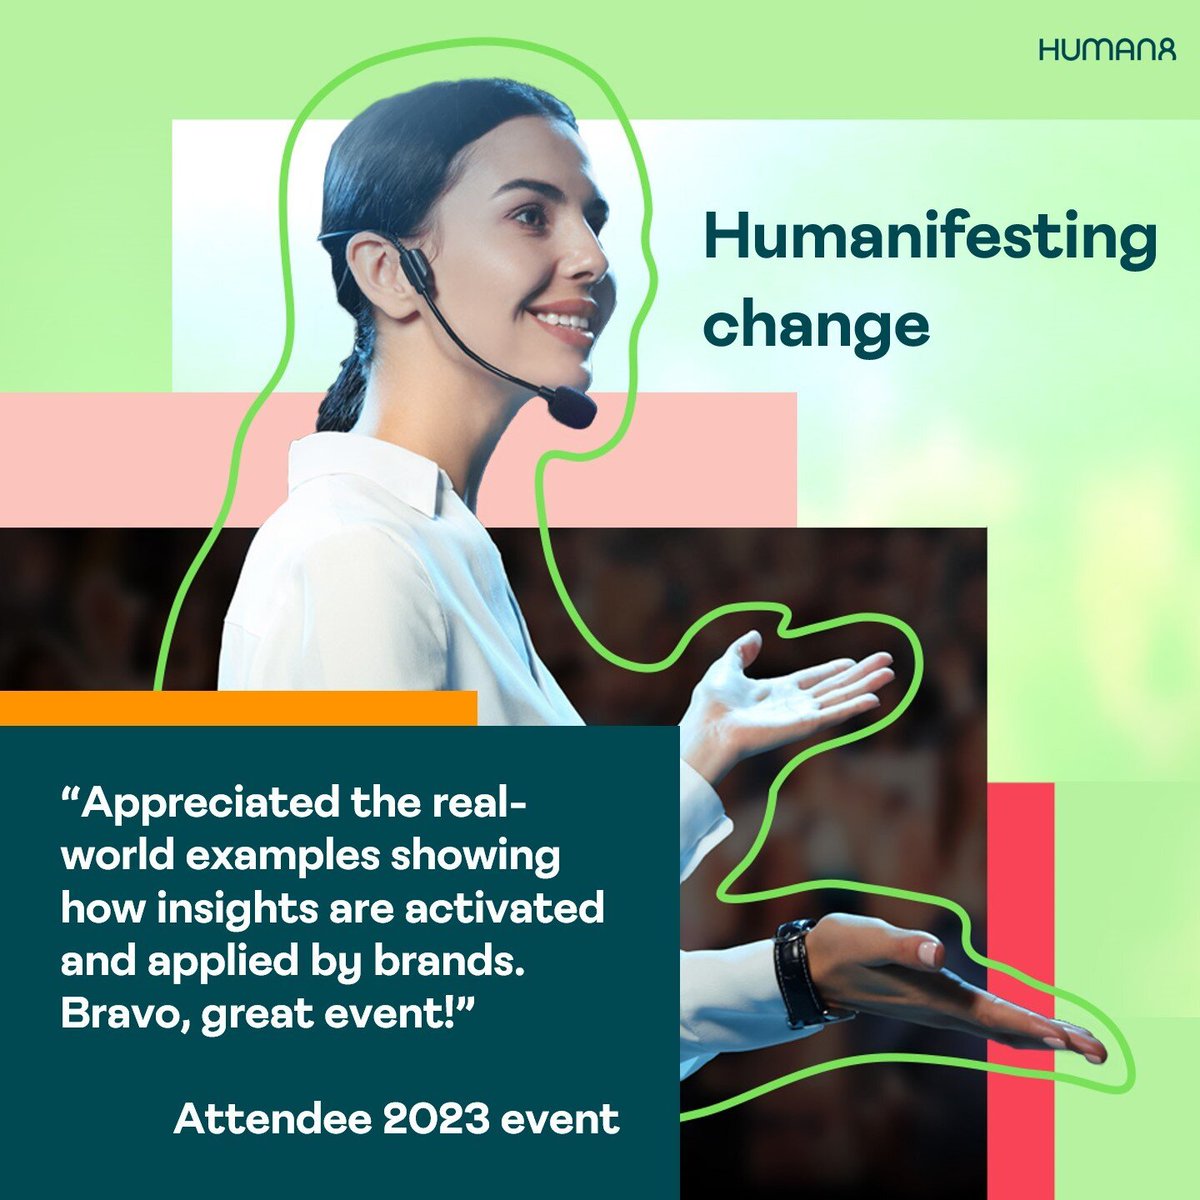 🚨Our 2024 global event: Humanifesting change is officially OPEN for registrations! 🚨 Not your typical consumer insight event, this is a virtual celebration of change as told by Human8 clients worldwide. Grab your FREE spot now 👉inspire.wearehuman8.com/44hC8xJ #dowhatmatters